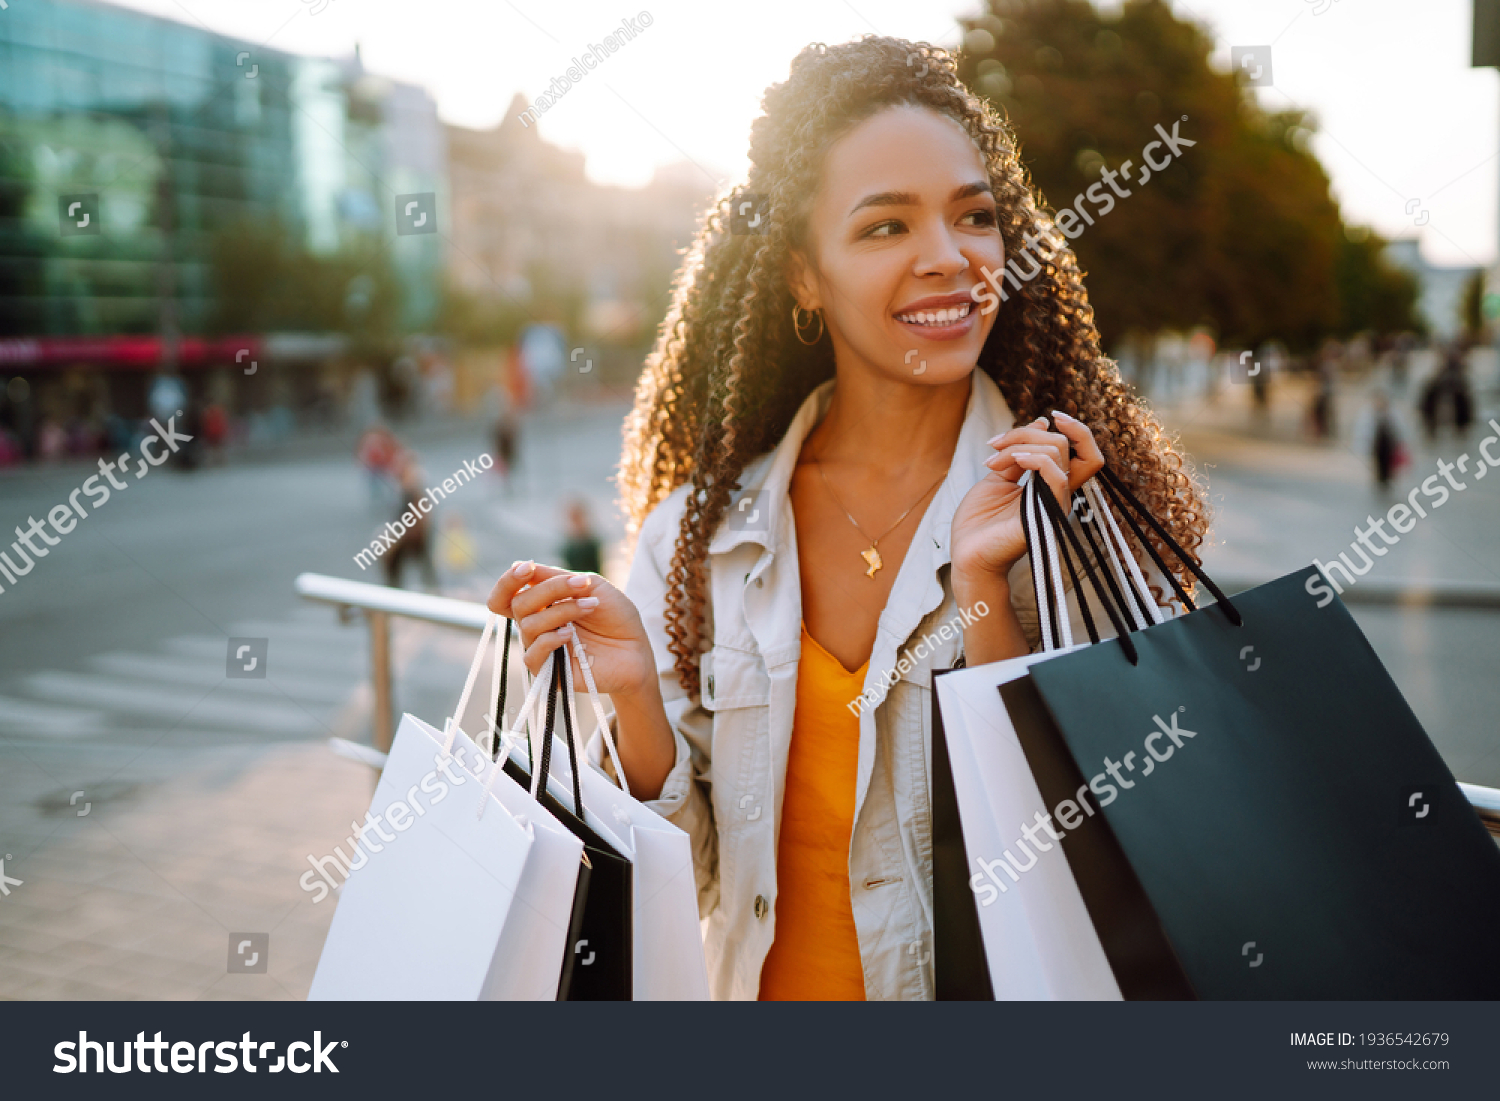 Fashion woman with shopping bags walking on street. Spring Style. Consumerism, sale, purchases, shopping, lifestyle concept. #1936542679